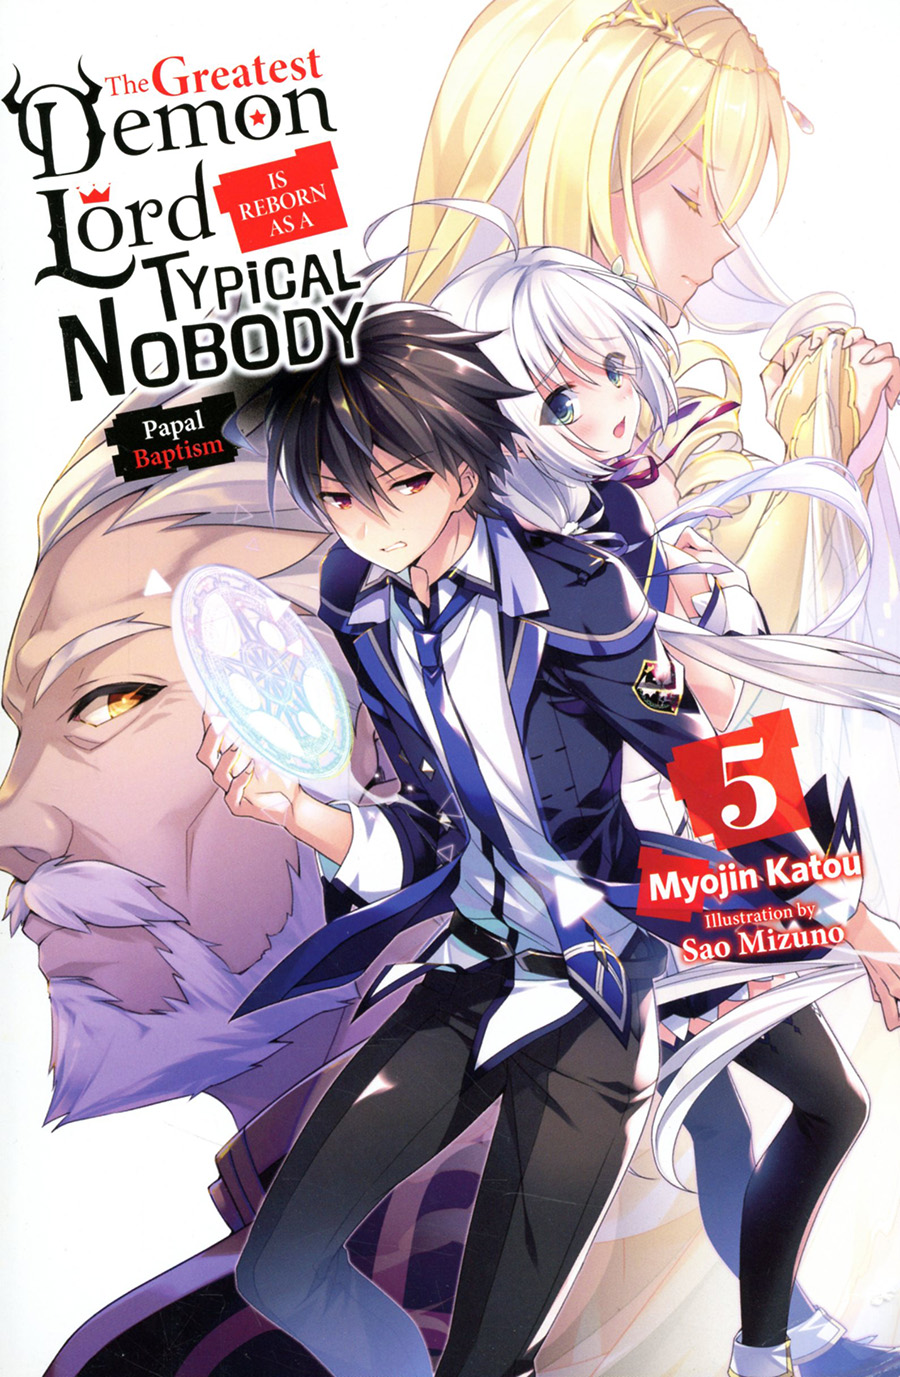 Greatest Demon Lord Is Reborn As A Typical Nobody Light Novel Vol 5 Papal Baptism TP